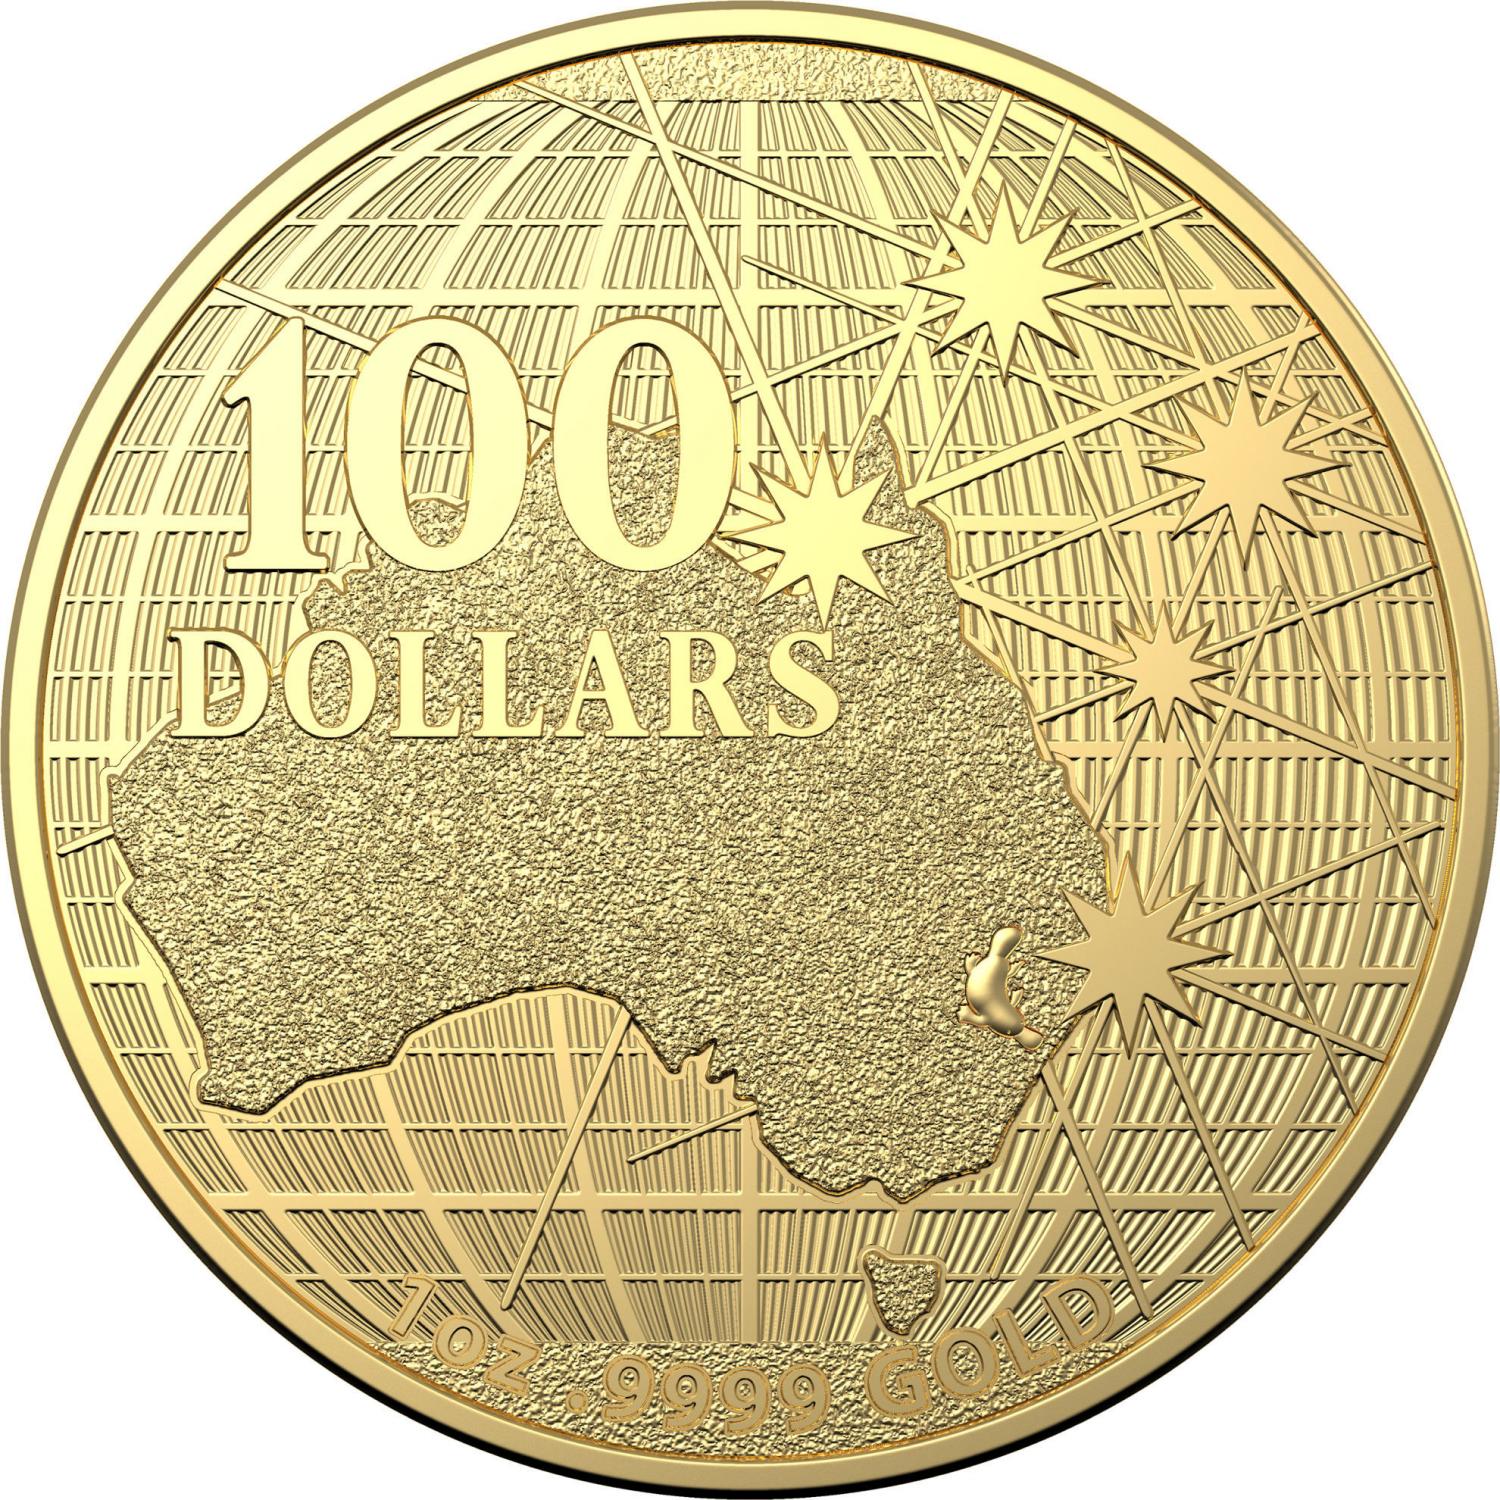 Thumbnail for 2021 $100 Beneath the Southern Skies 1oz Gold Bullion Coin Royal Aust Mint - Platypus Silhouette